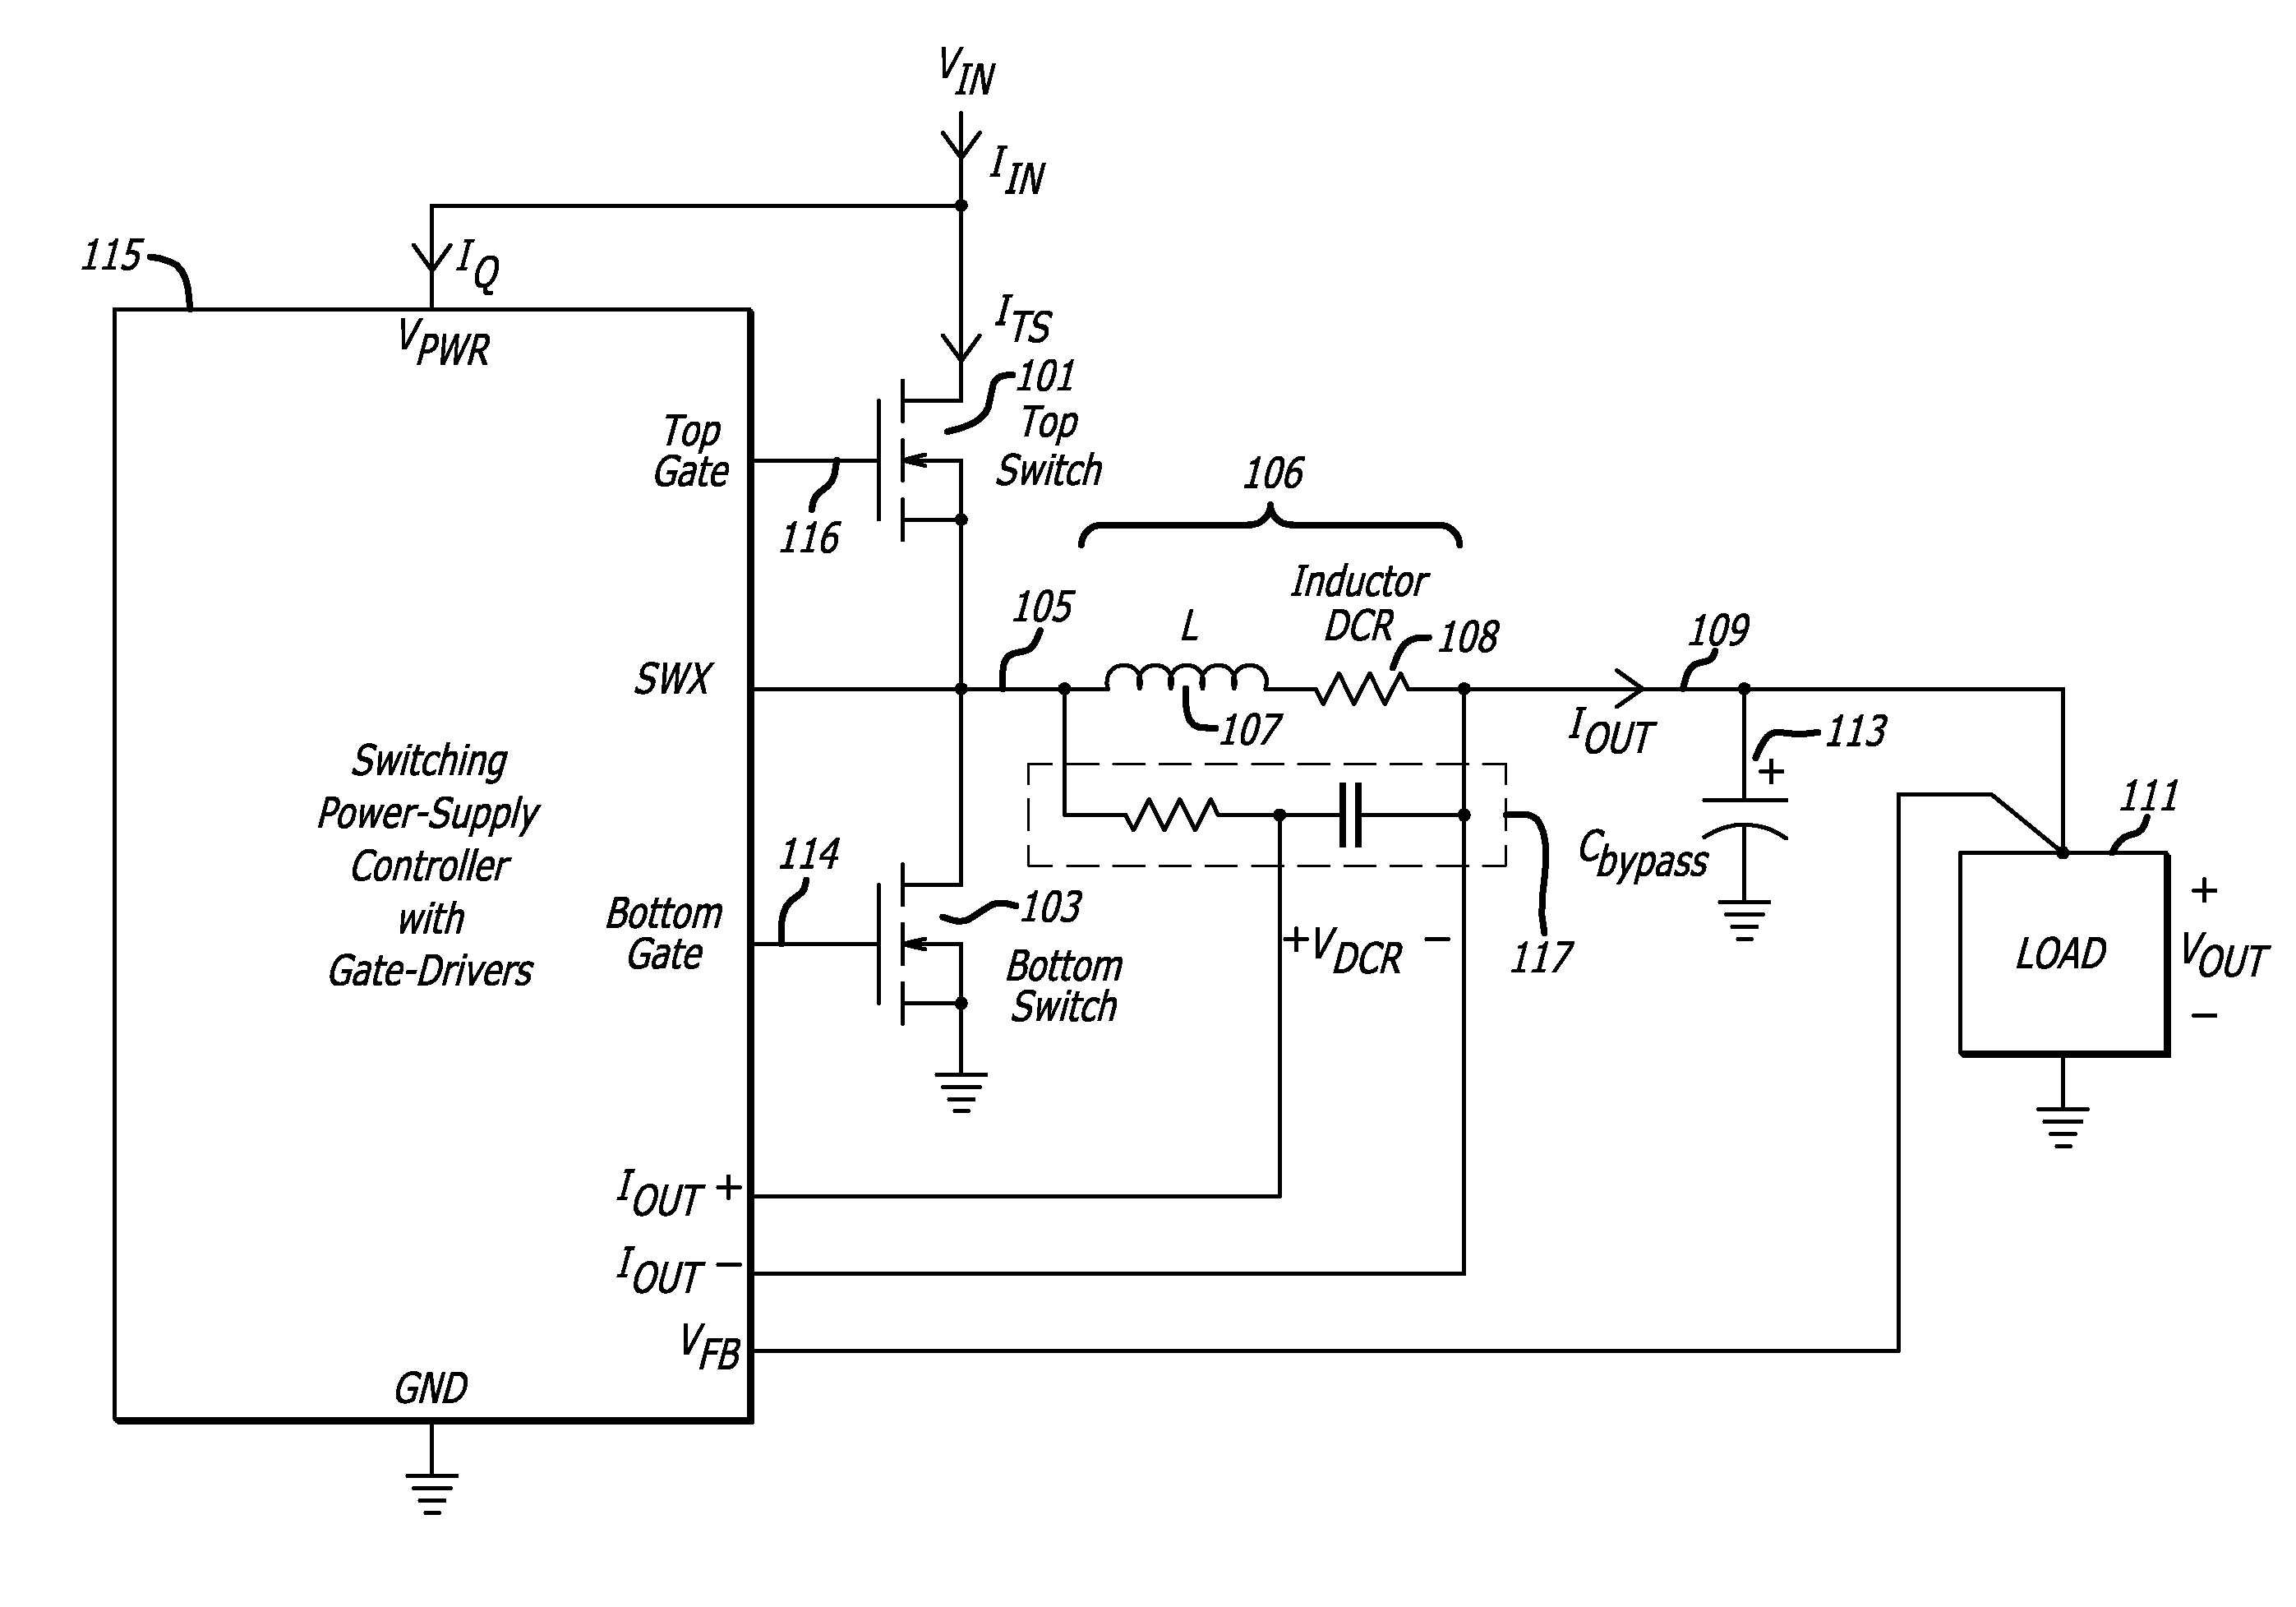 Efficiency measuring circuit for dc-dc converter which calculates internal resistance of switching inductor based on duty cycle